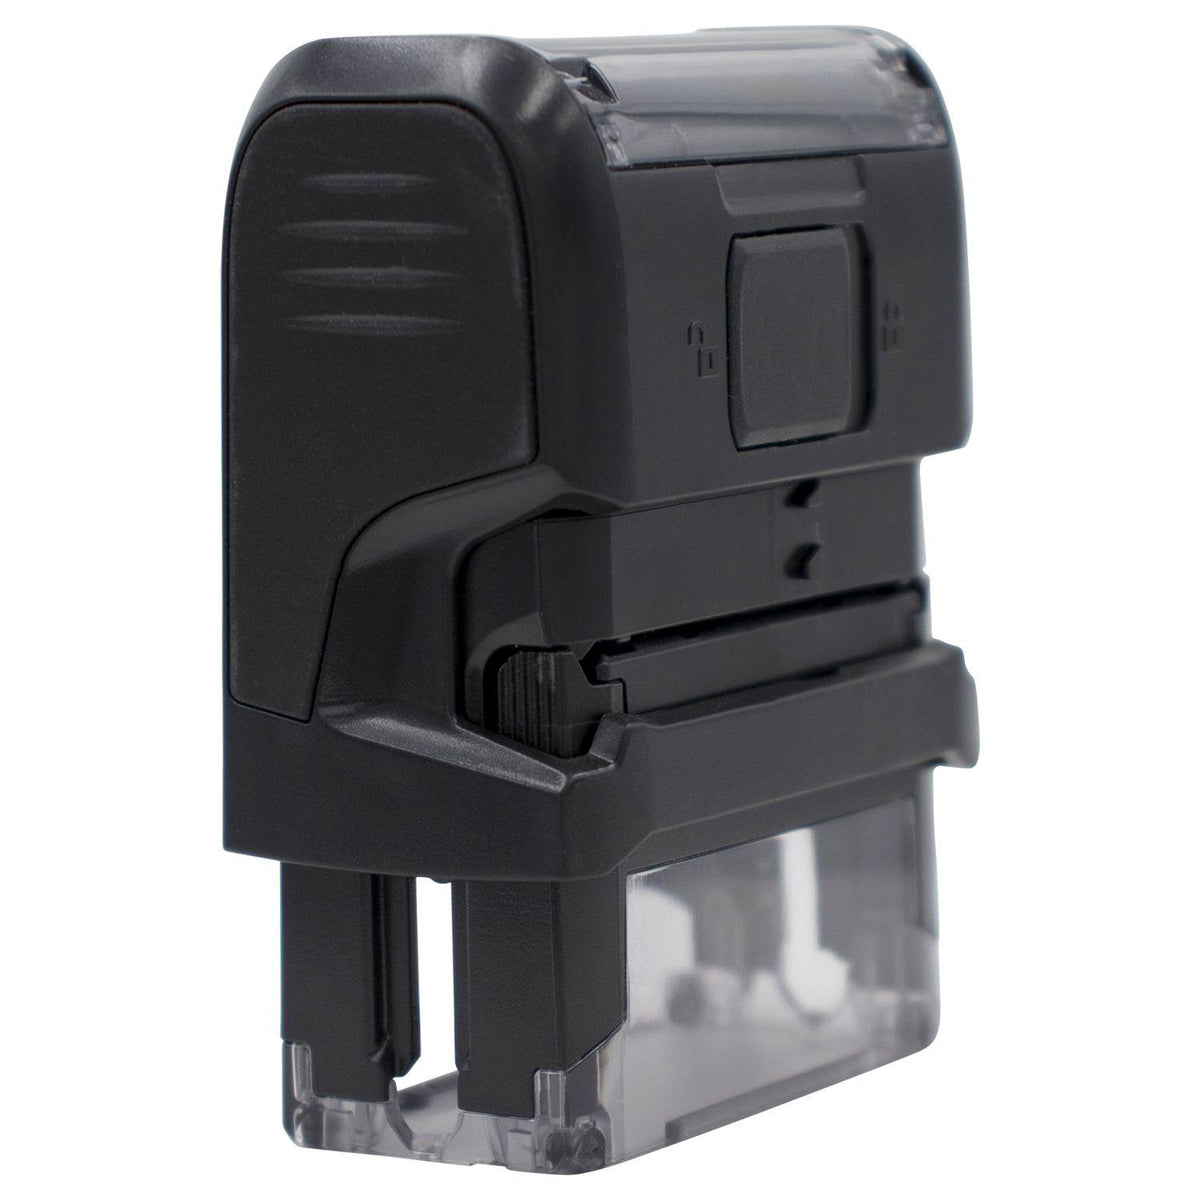 Self-Inking Bold Recibido Stamp - Engineer Seal Stamps - Brand_Trodat, Impression Size_Small, Stamp Type_Self-Inking Stamp, Type of Use_Office, Type of Use_Shipping &amp; Receiving